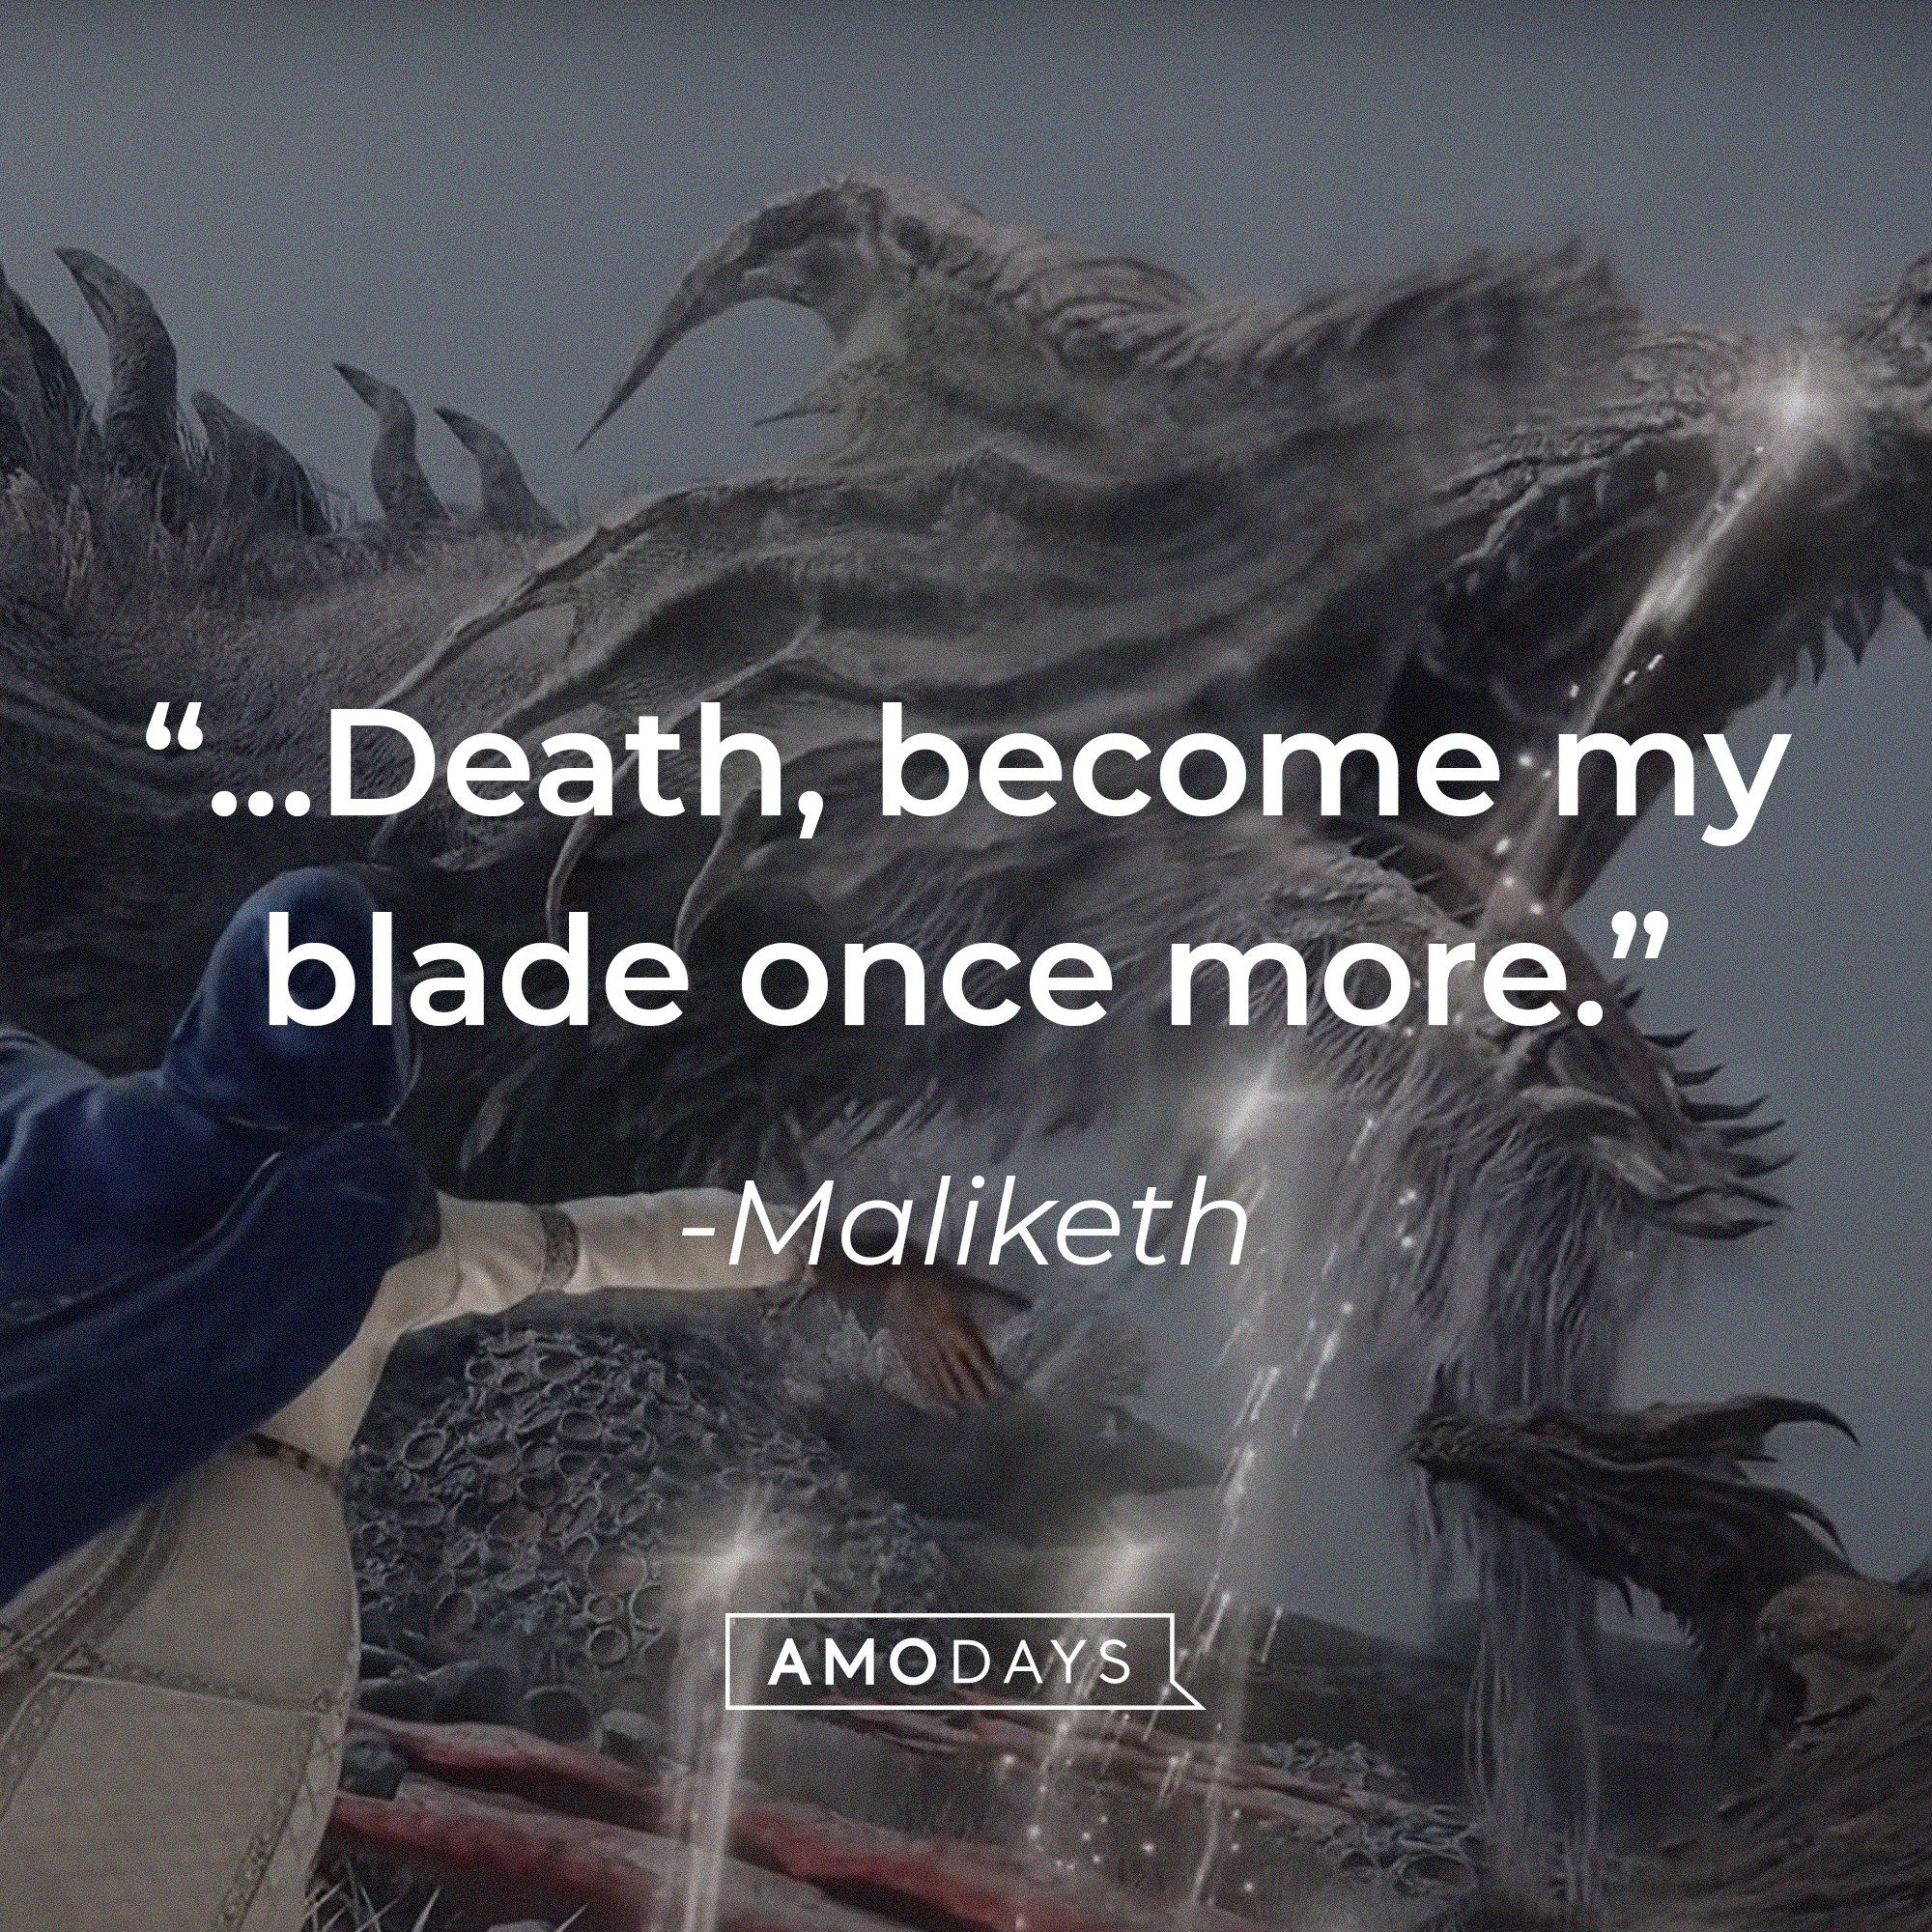 Maliketh’s quote: "...Death, become my blade once more." | Image: AmoDays